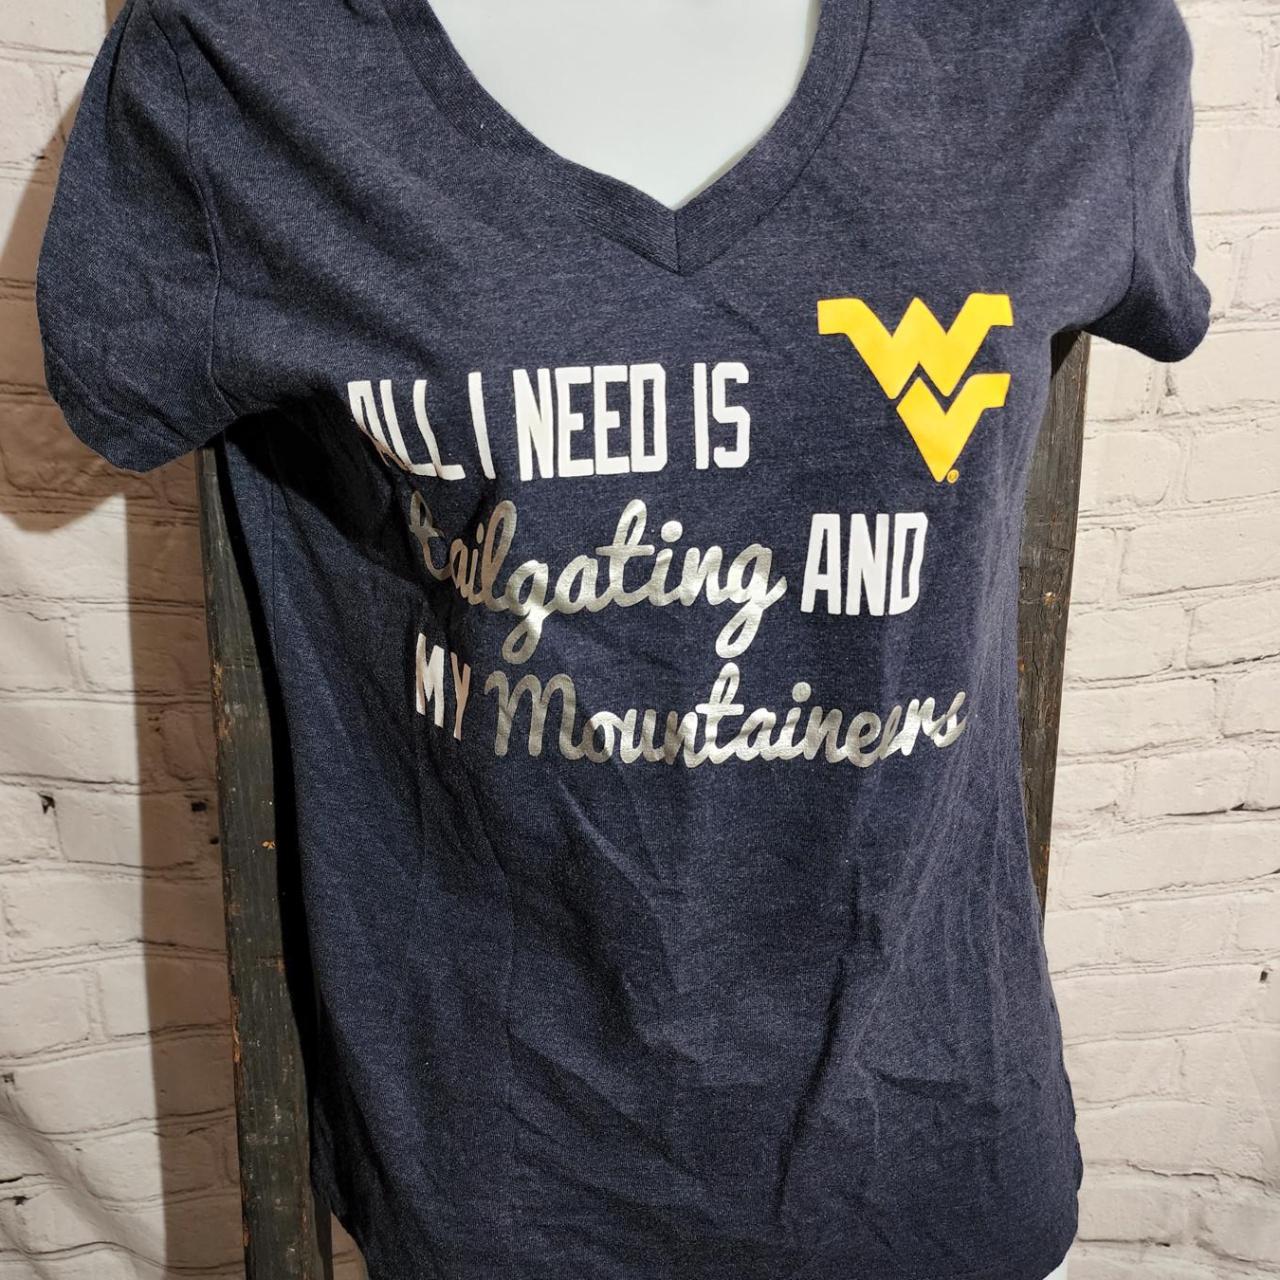 Product Image 1 - Small WV Mountaineers Tailgating Shirt

I